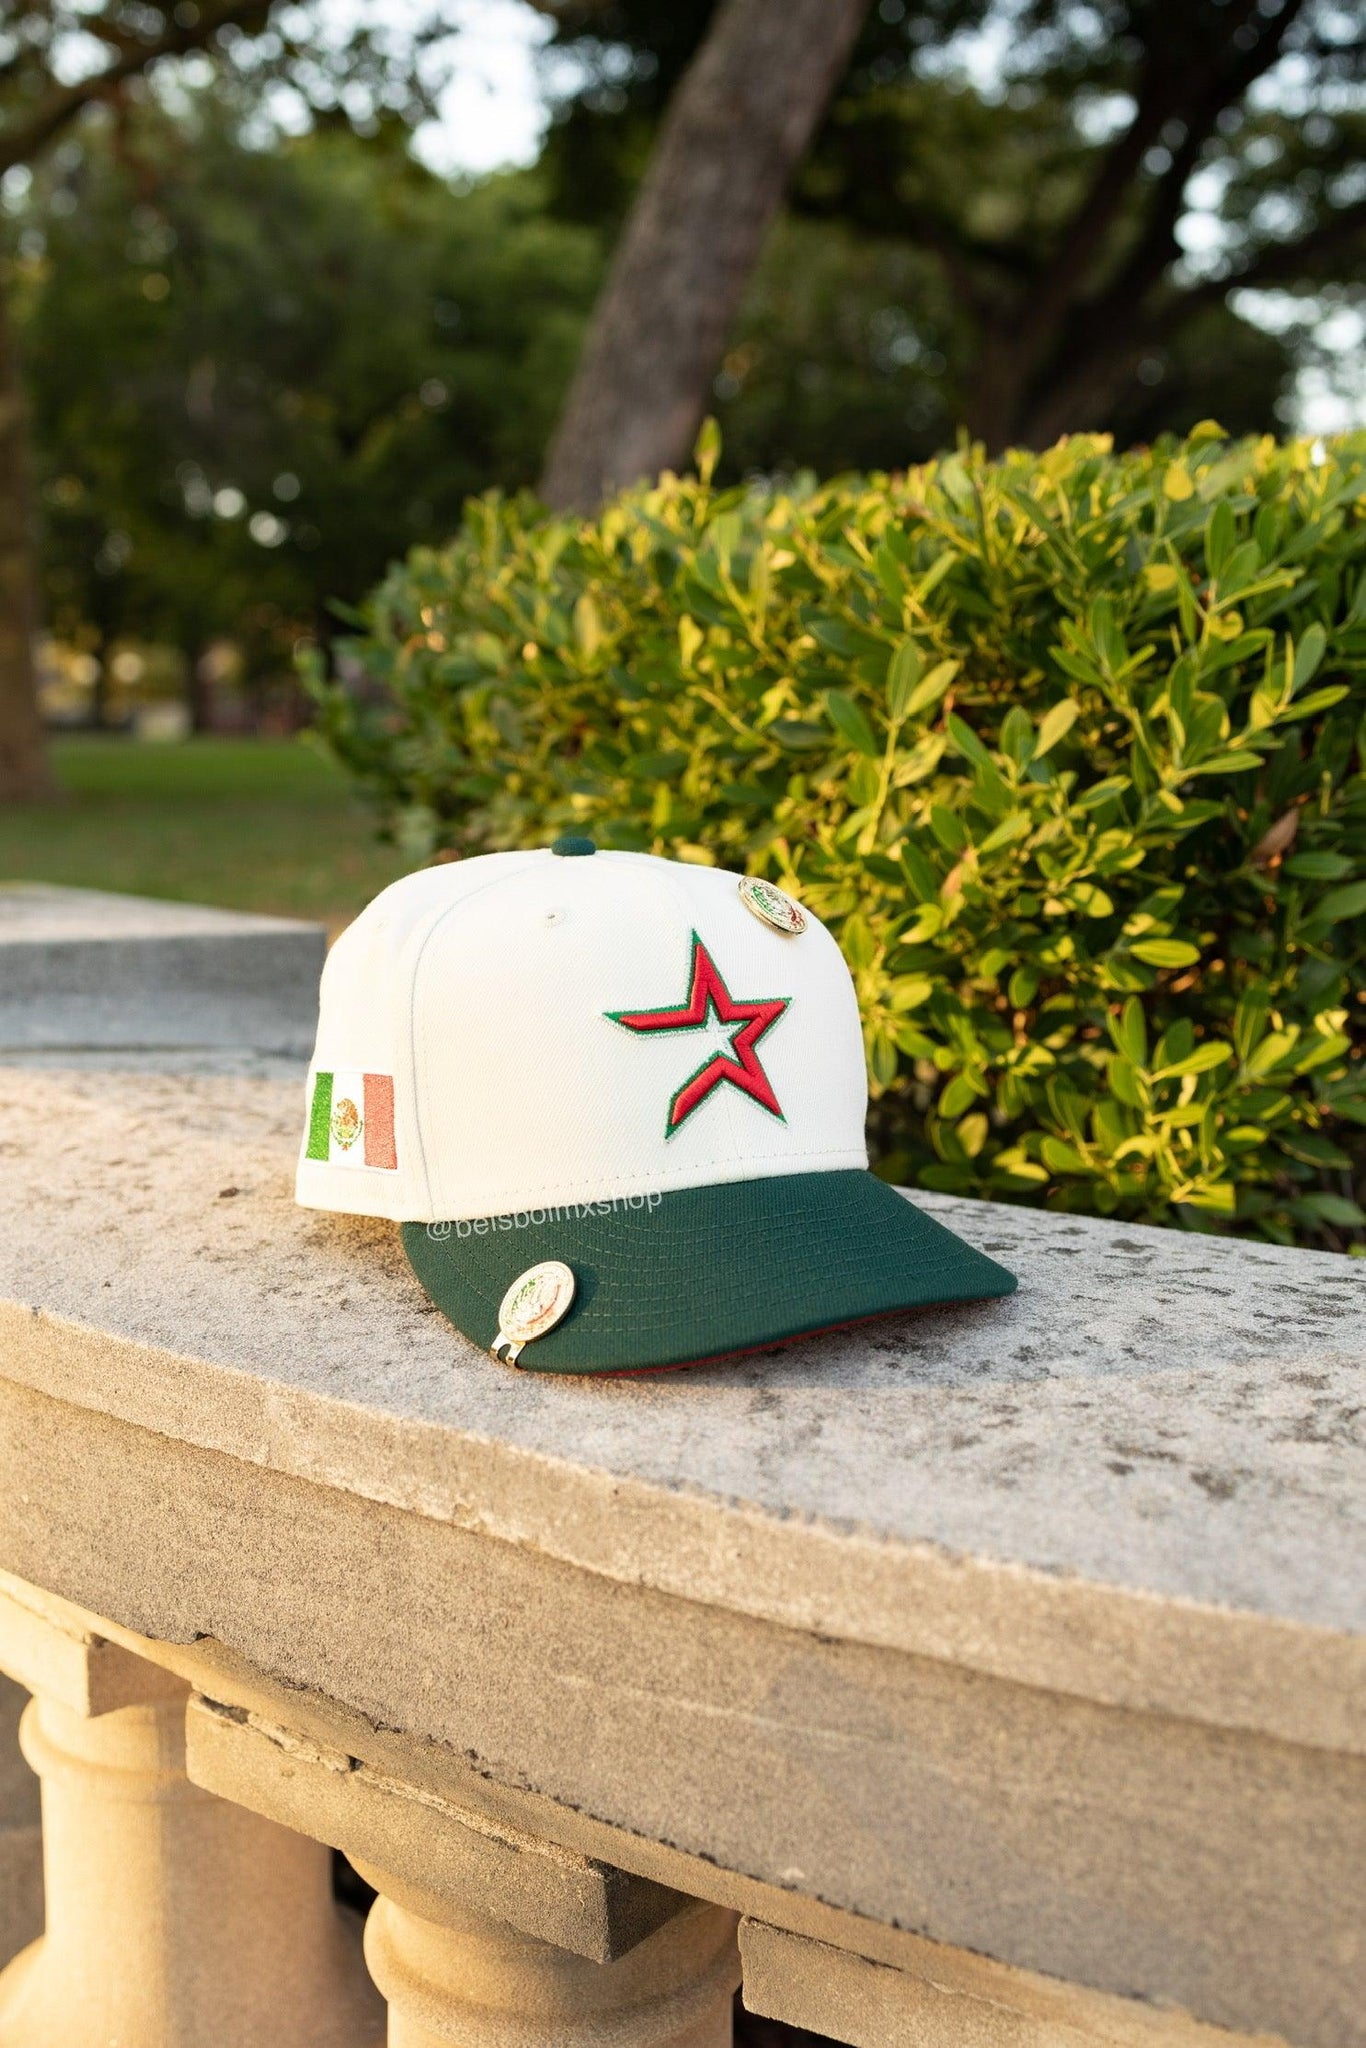 Mexico flag Houston astros new era fitted with 1 exclusive pin or blip